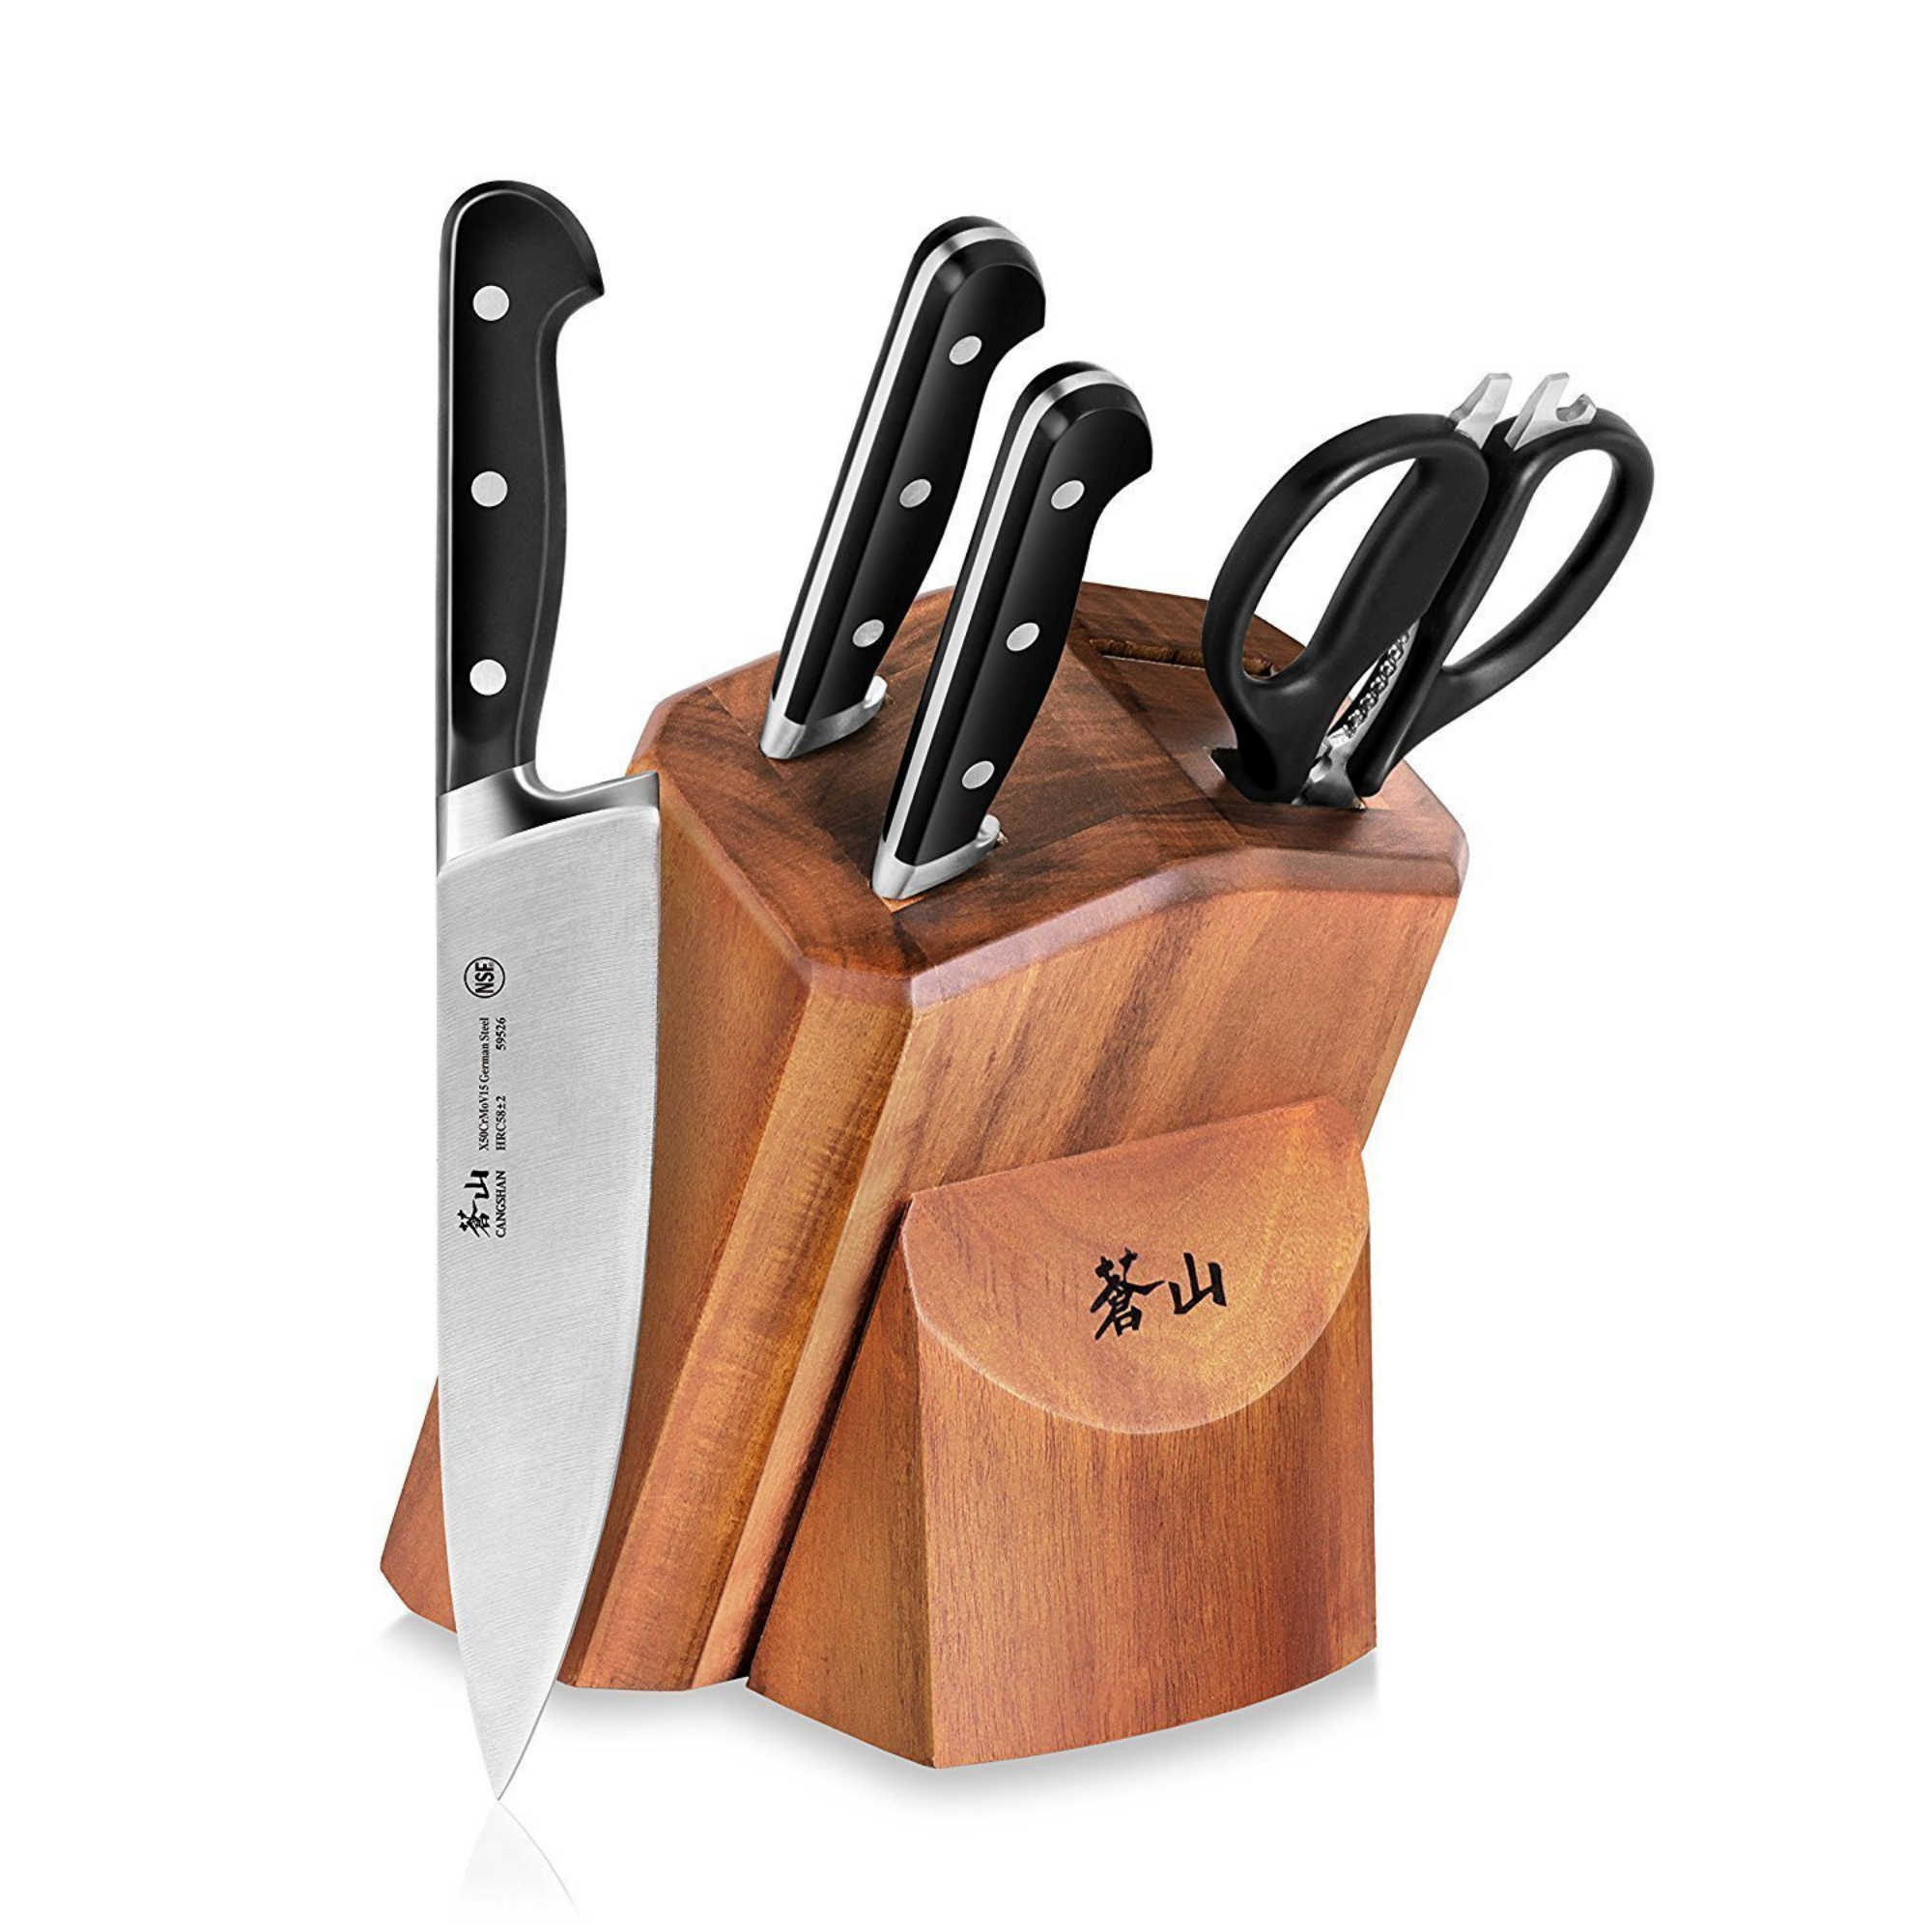 Best 16-Piece Japanese Knife Set with Removable Block